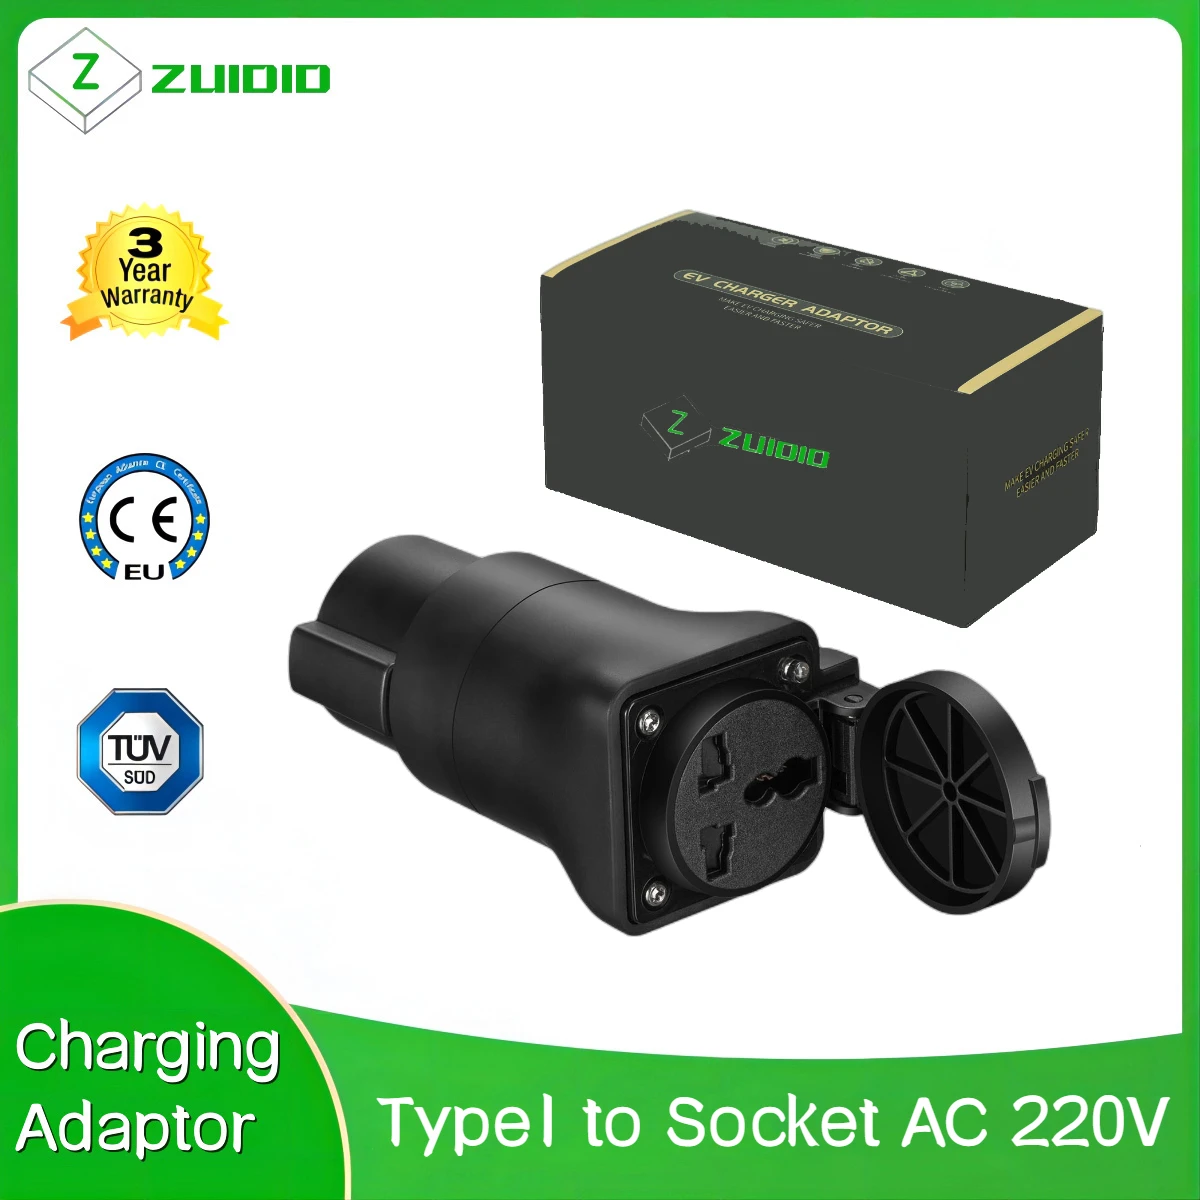 

Connector Adapter EVSE Plug For RV Camper Electric Scooter External Type 1 SAE J1772 Type1 to Socket AC 220V EV Charger